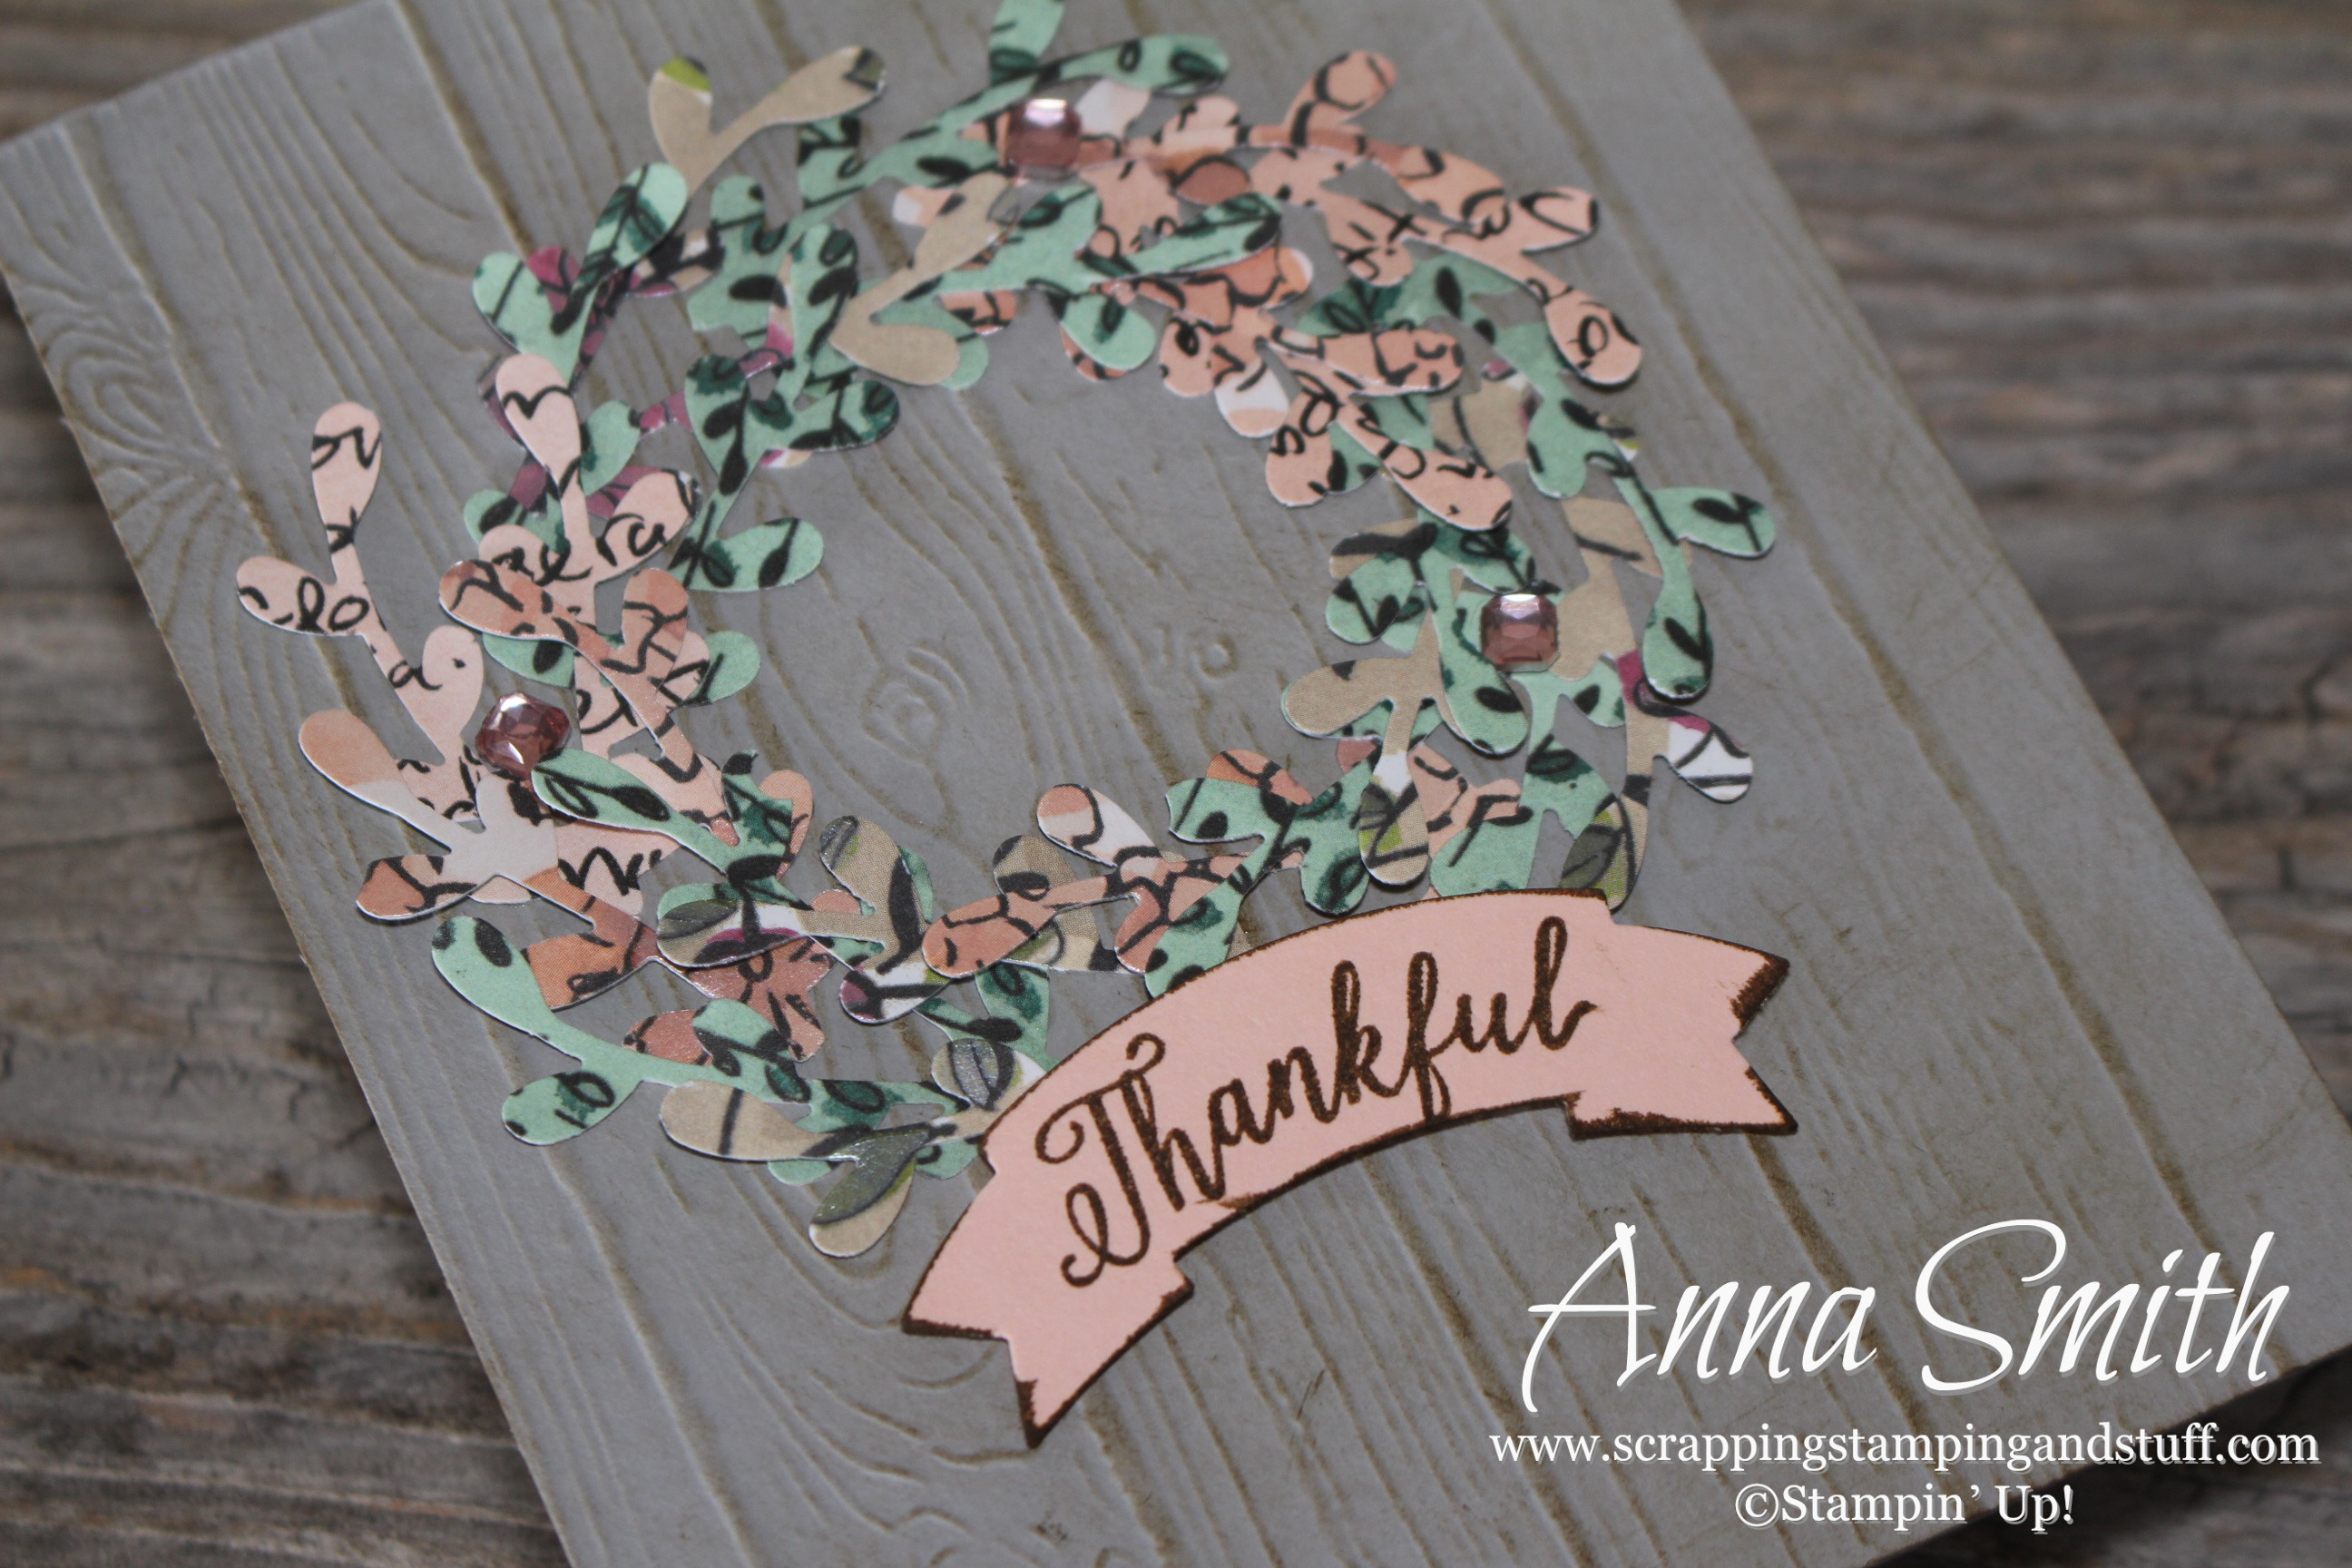 A Rustic Wreath Card with the Stampin’ Up! Sprig Punch